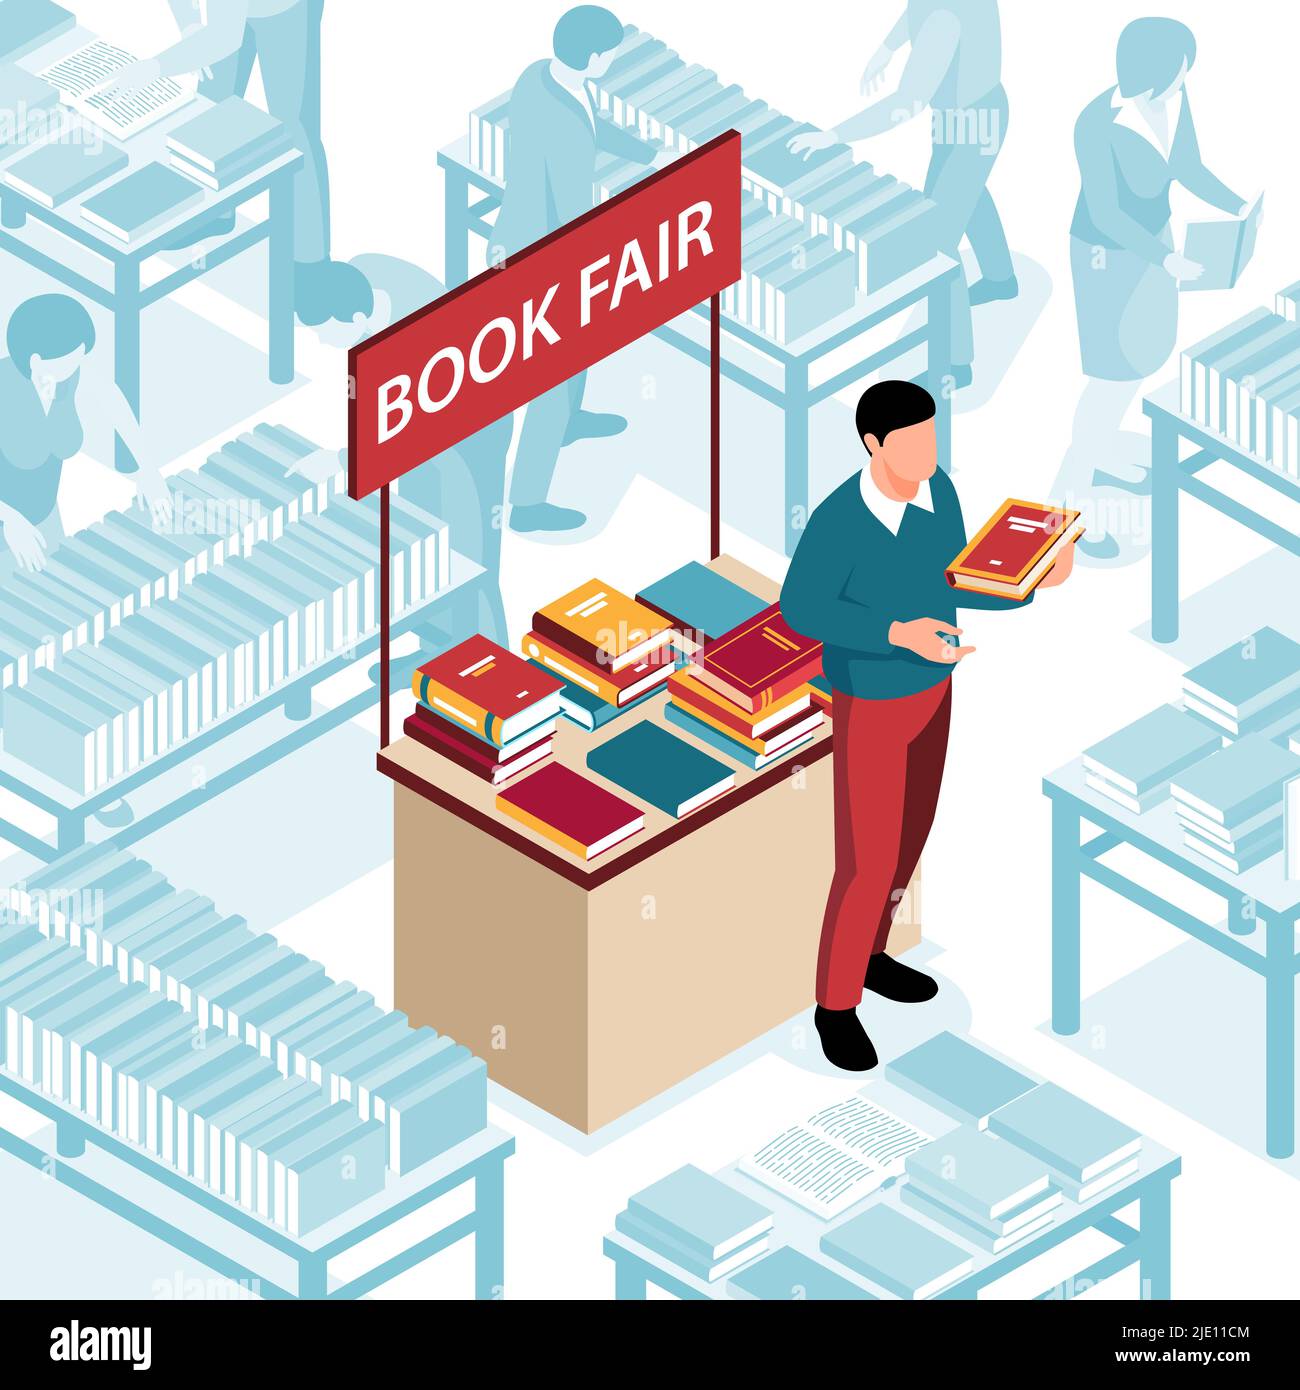 Man next to stand with books at literature exhibition 3d isometric vector illustration Stock Vector